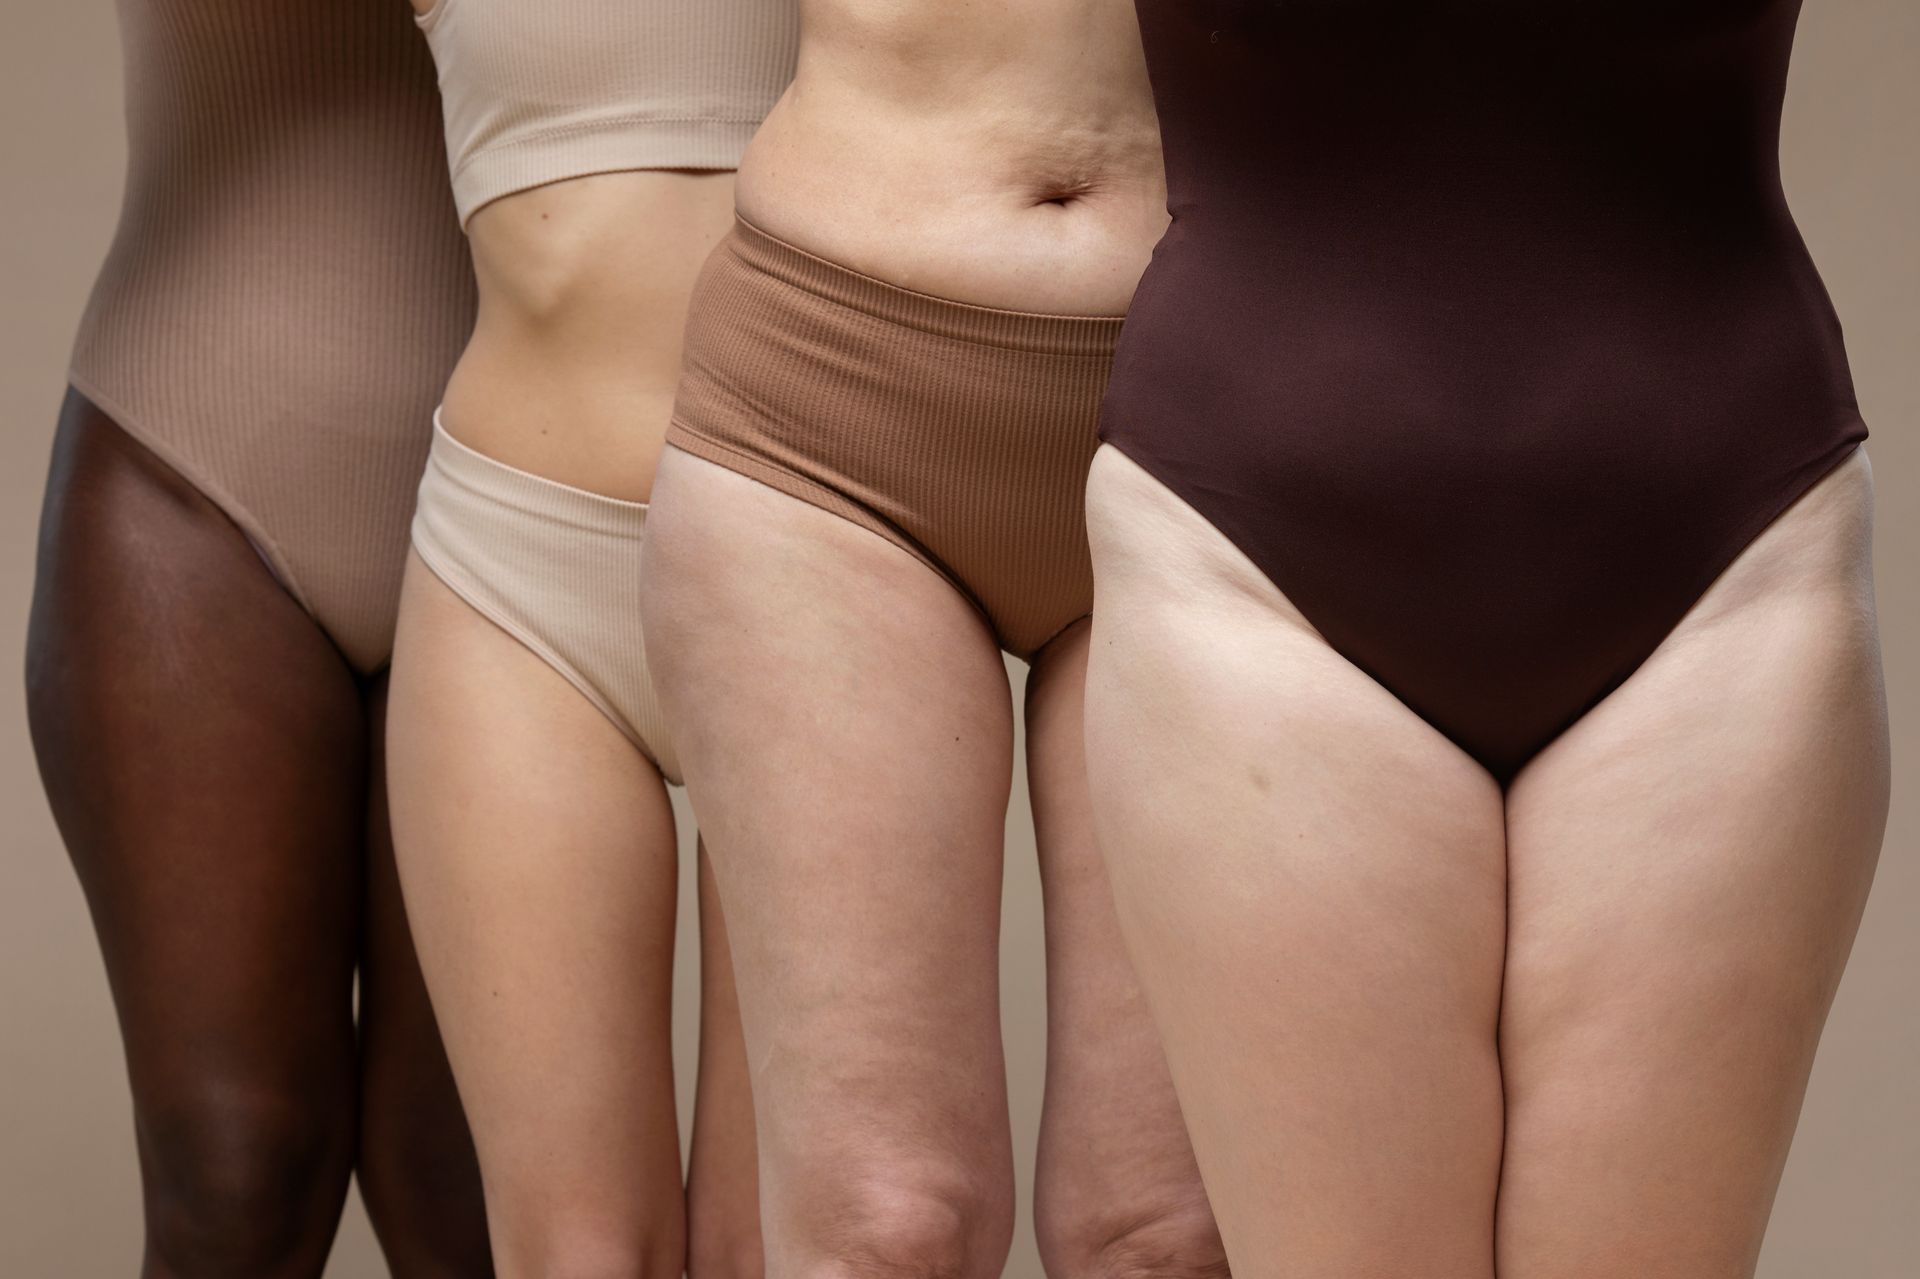 three women standing next to each other wearing different colored underwear